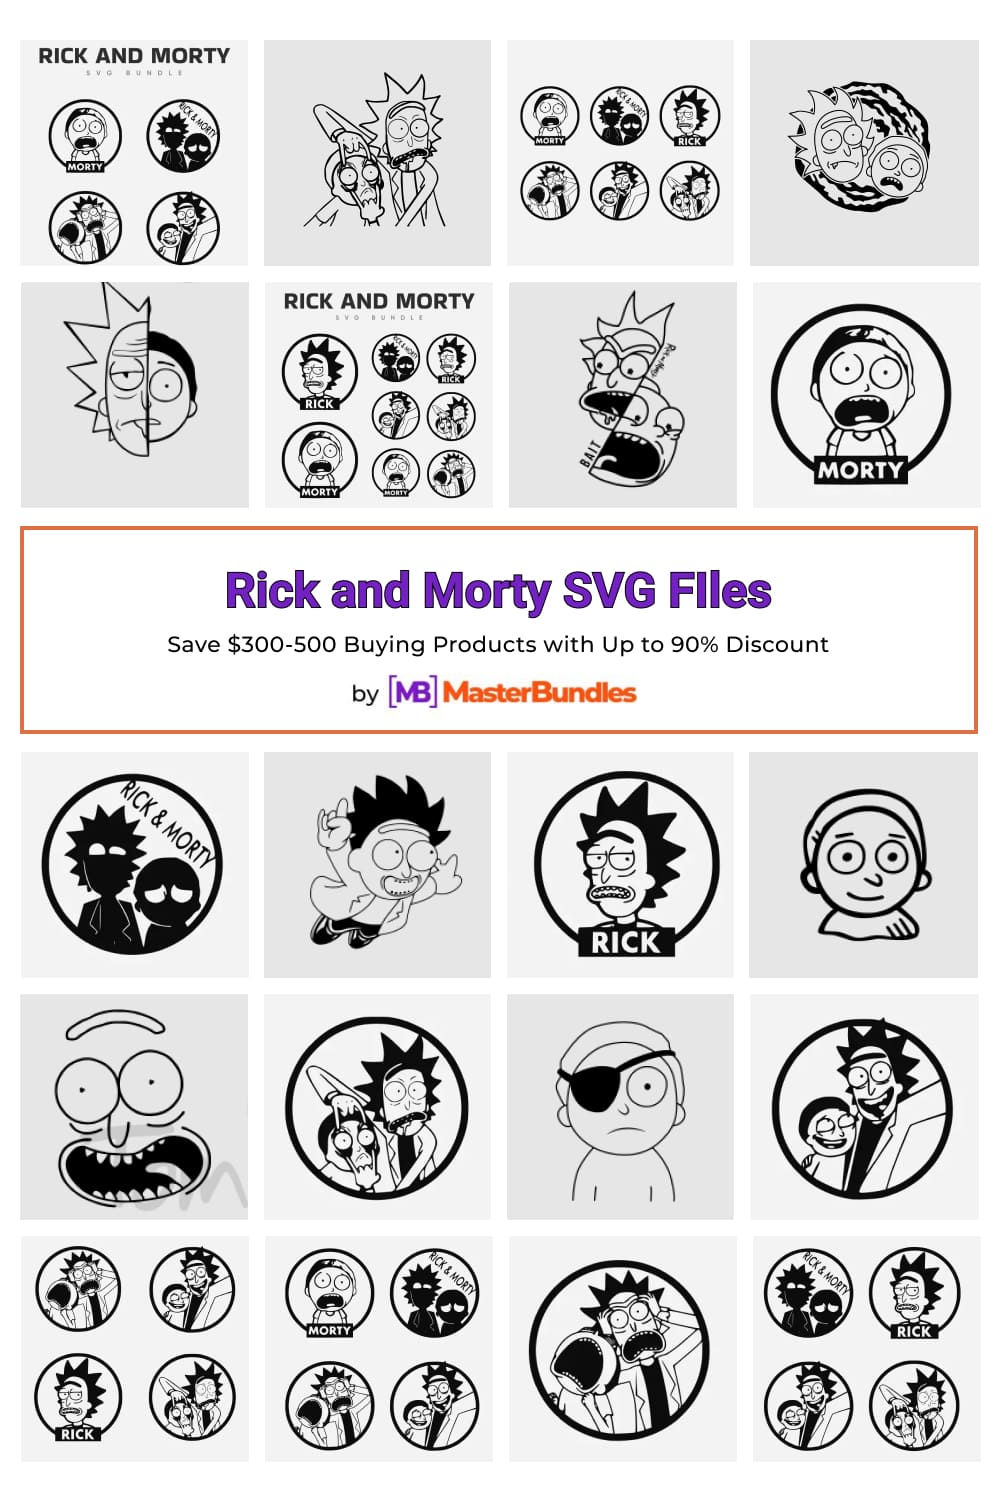 Rick and Morty SVG FIles Pinterest image.